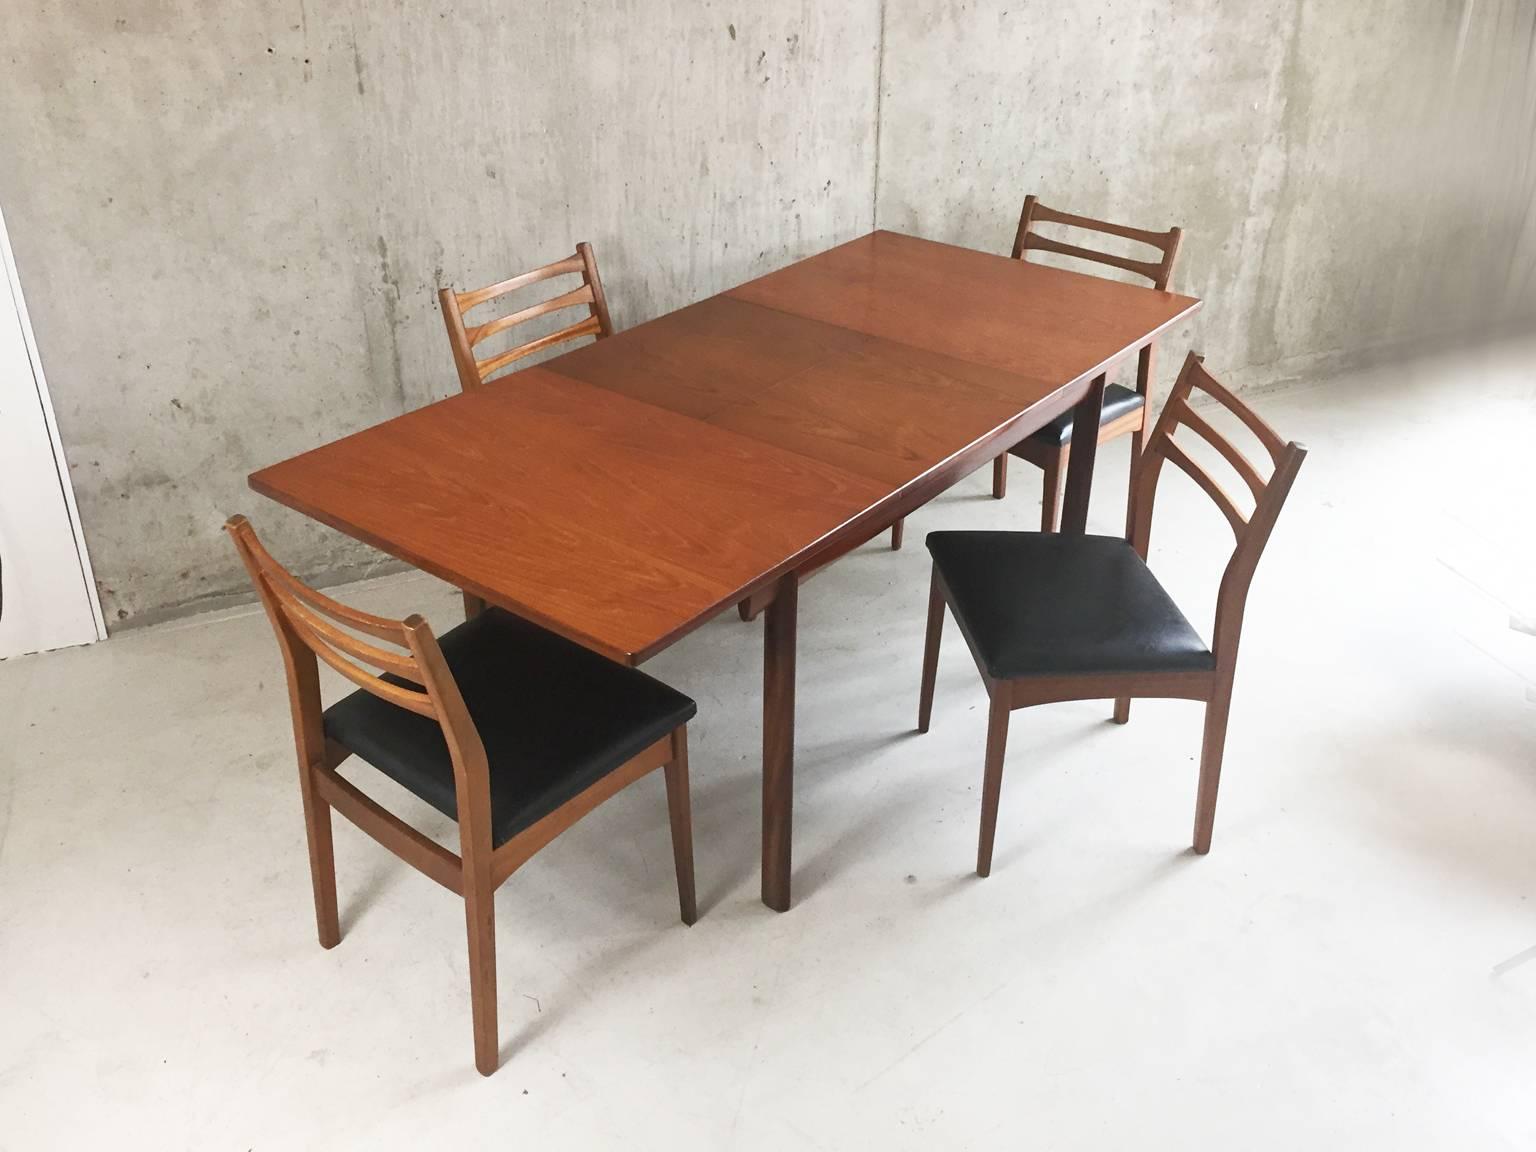 A high quality stylish extendable table from English manufacturer White and Newton (original label on item). The table is extendable by means of a central folded segment which folds away under the surface when not in use.

The chairs are by very